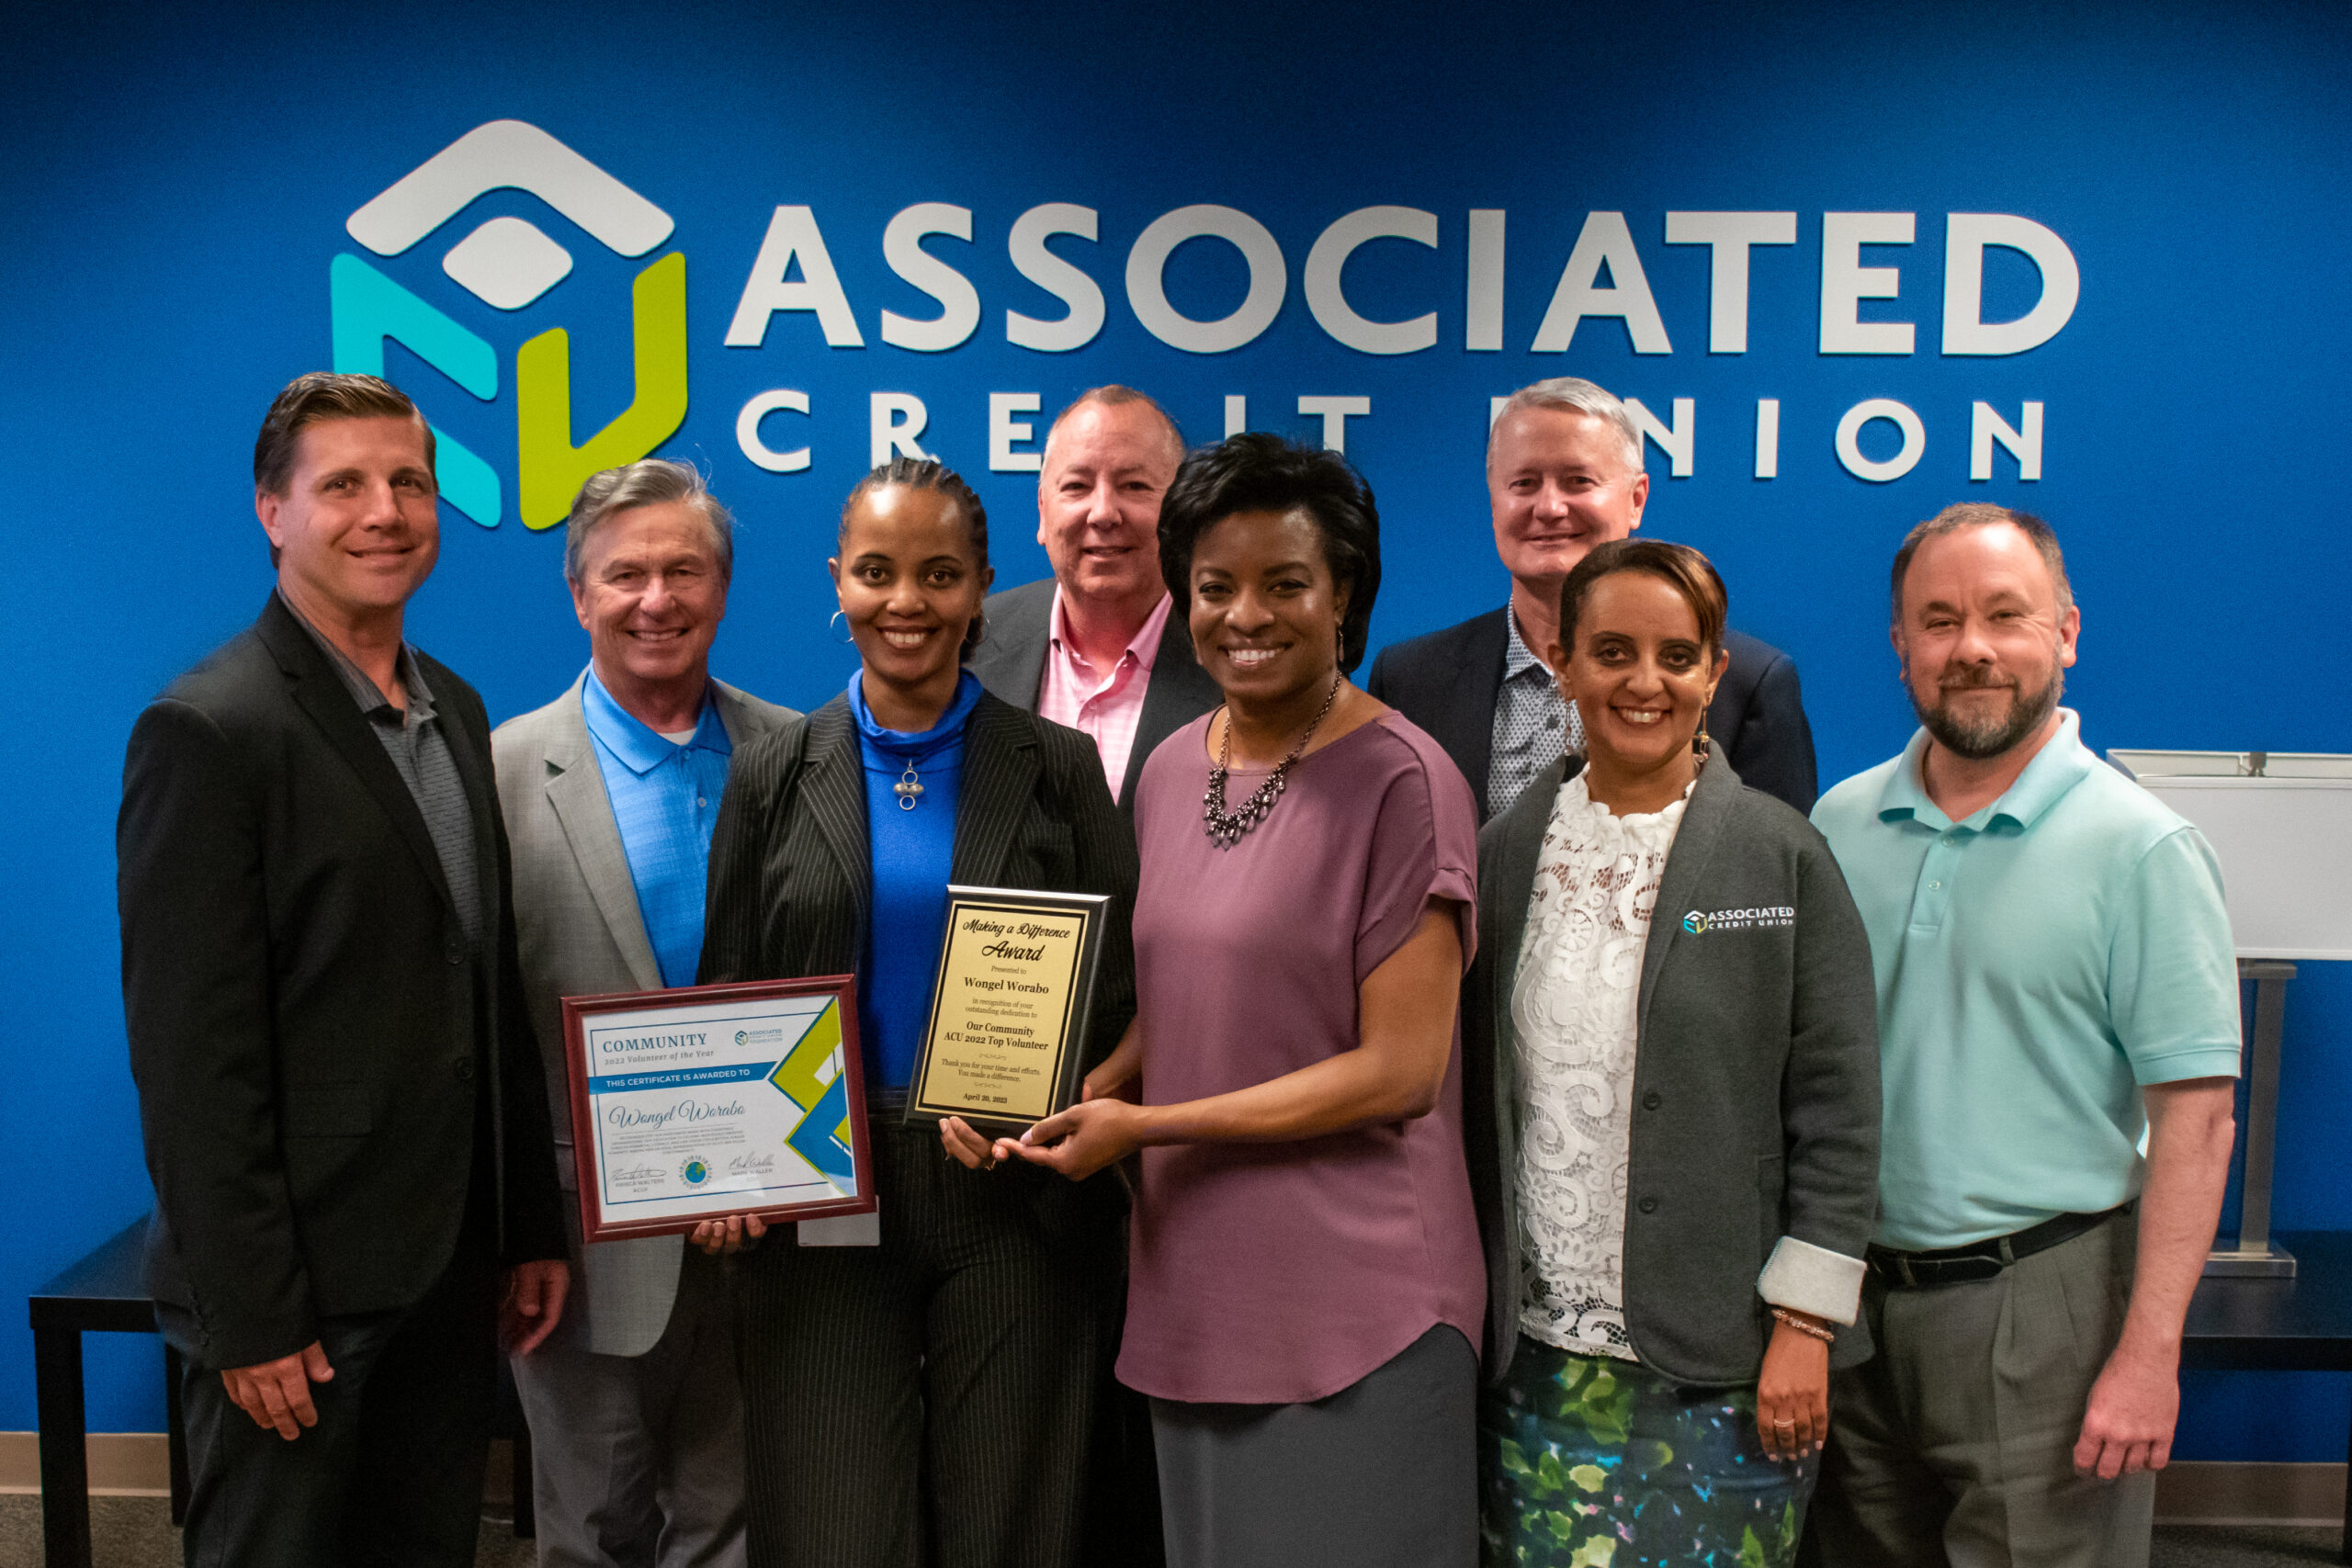 ASSOCIATED CREDIT UNION CELEBRATES NATIONAL VOLUNTEER MONTH BY RECOGNIZING EMPLOYEES